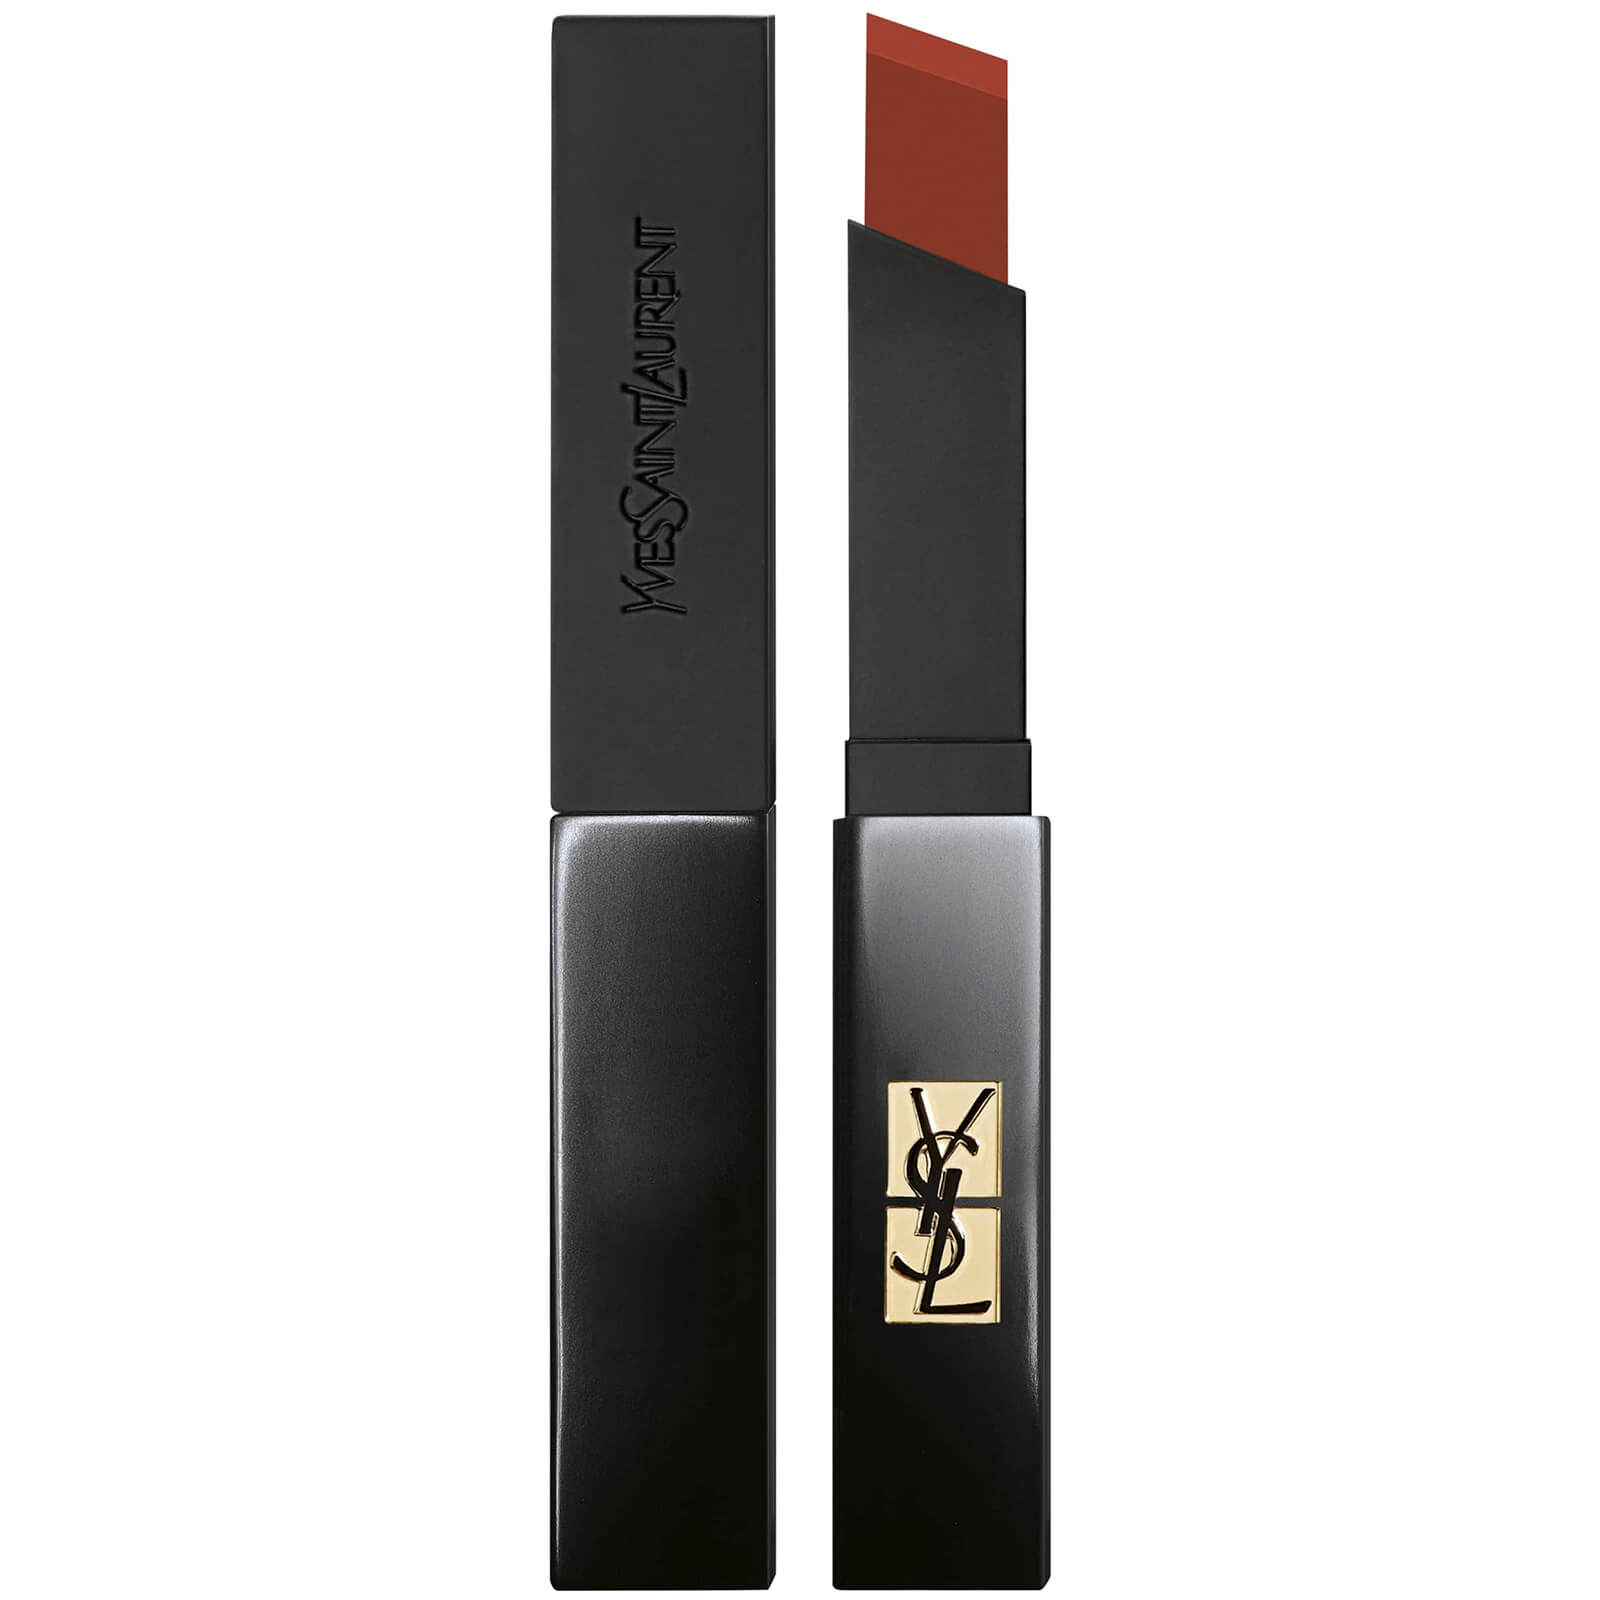 Image of Yves Saint Laurent Rouge Pur Couture The Slim Velvet Radical Lipstick 31g (Various Shades) - 1996